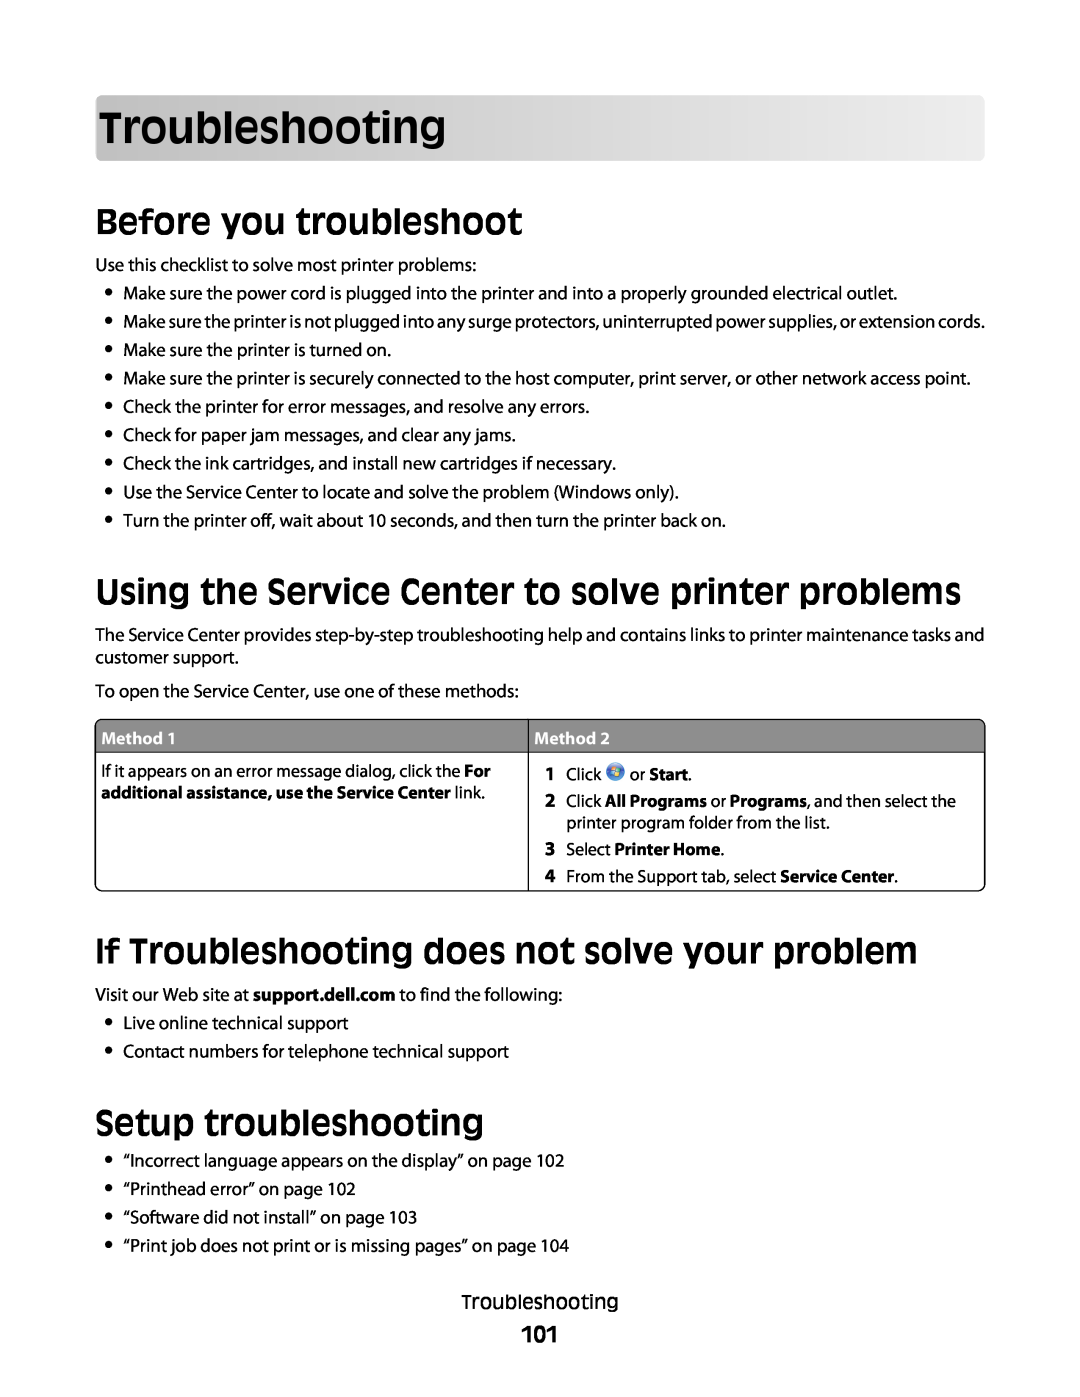 Dell V515W manual Troubleshooting, Before you troubleshoot, Using the Service Center to solve printer problems 